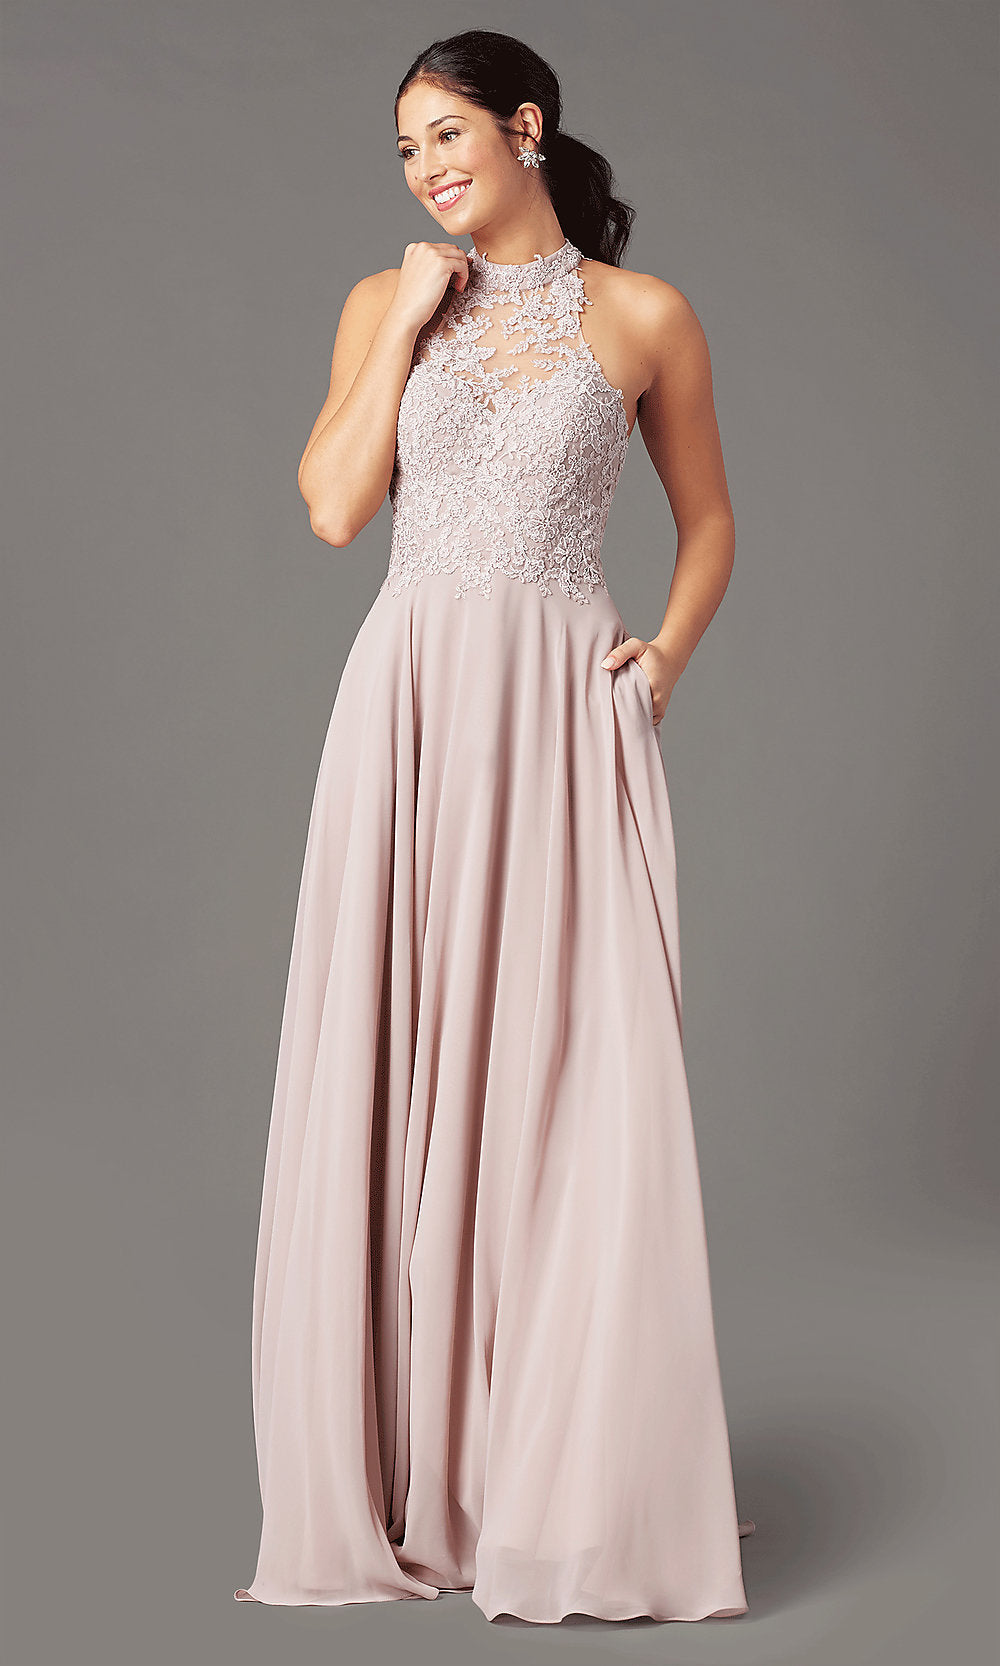 High-Neck PromGirl Prom Dress with Pockets